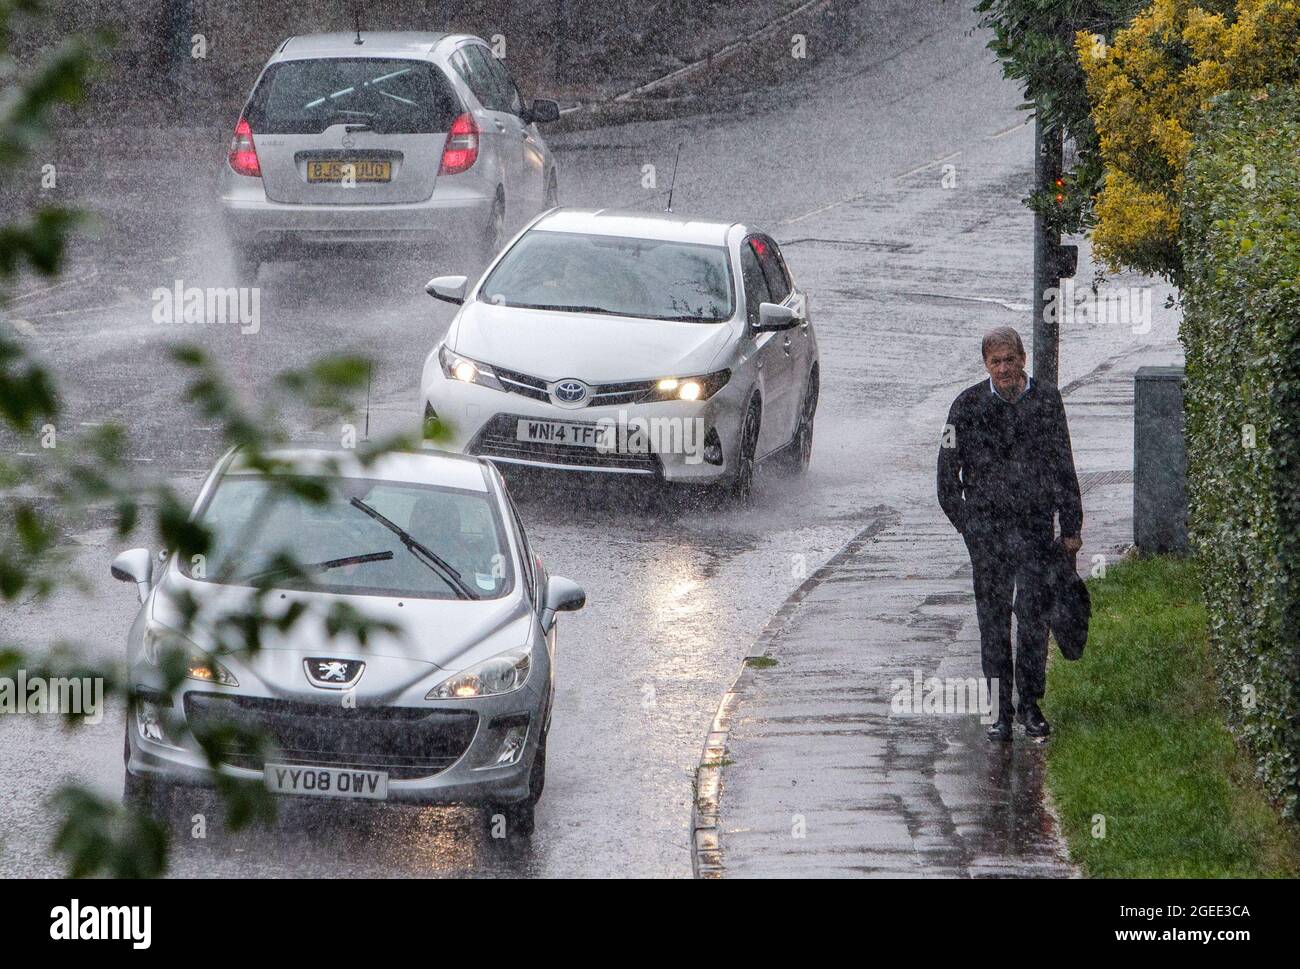 Chippenham, Wiltshire, UK. 19th August, 2021. Drivers and a pedestrian are pictured braving heavy rain in Chippenham as torrential rain showers make their way across the UK. Credit: Lynchpics/Alamy Live News Stock Photo